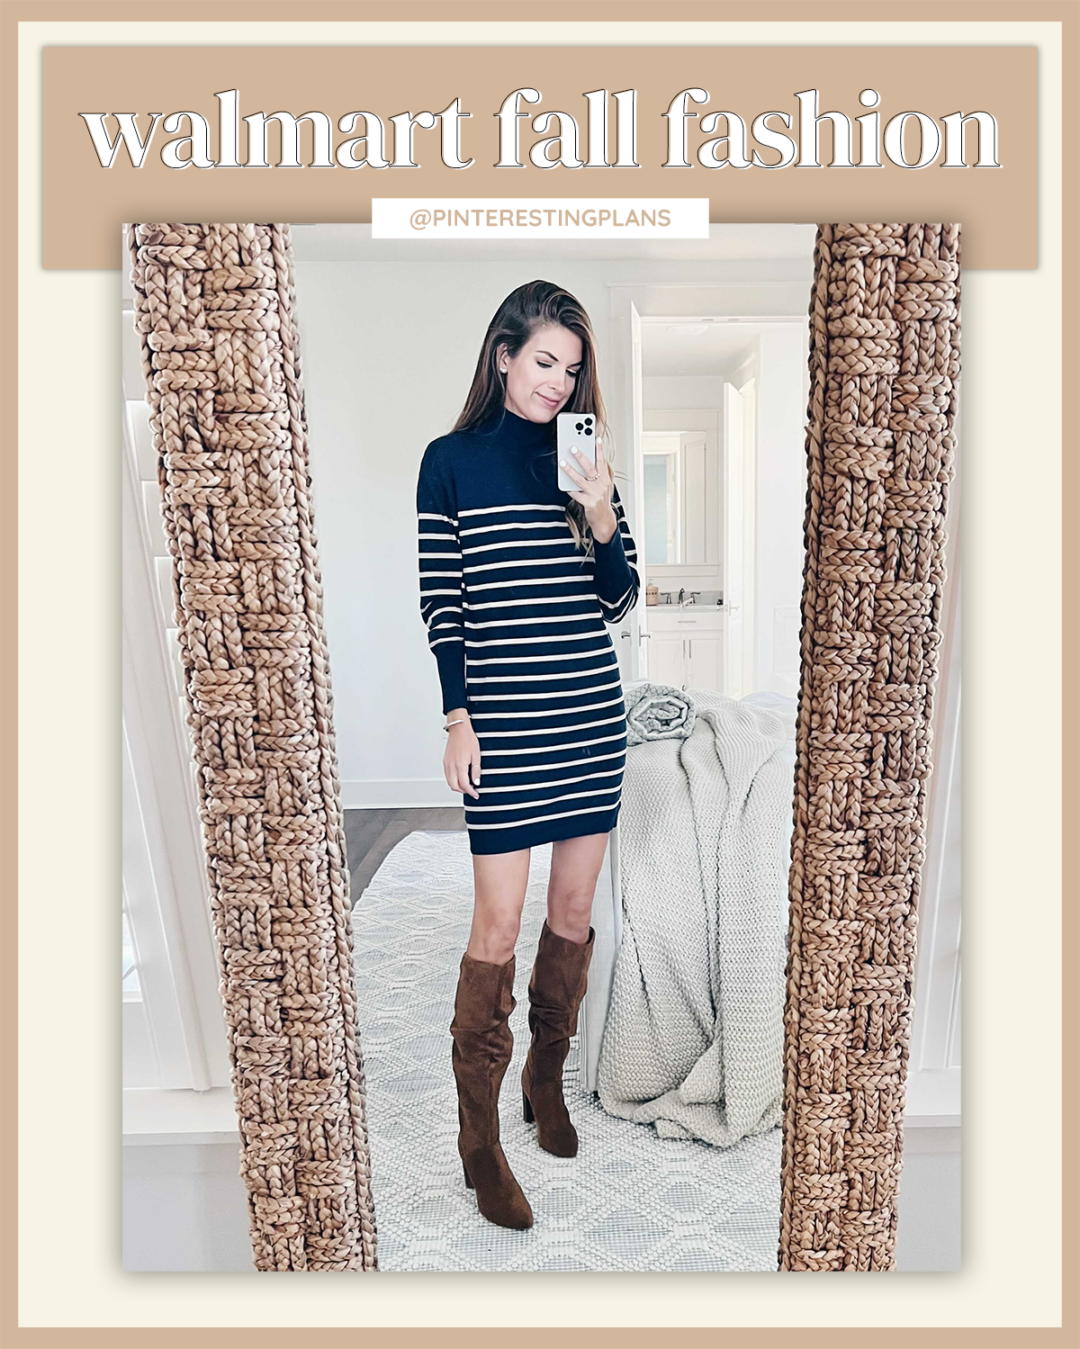 walmart fall fashion 2021 - sweater dress with knee high boots outfit